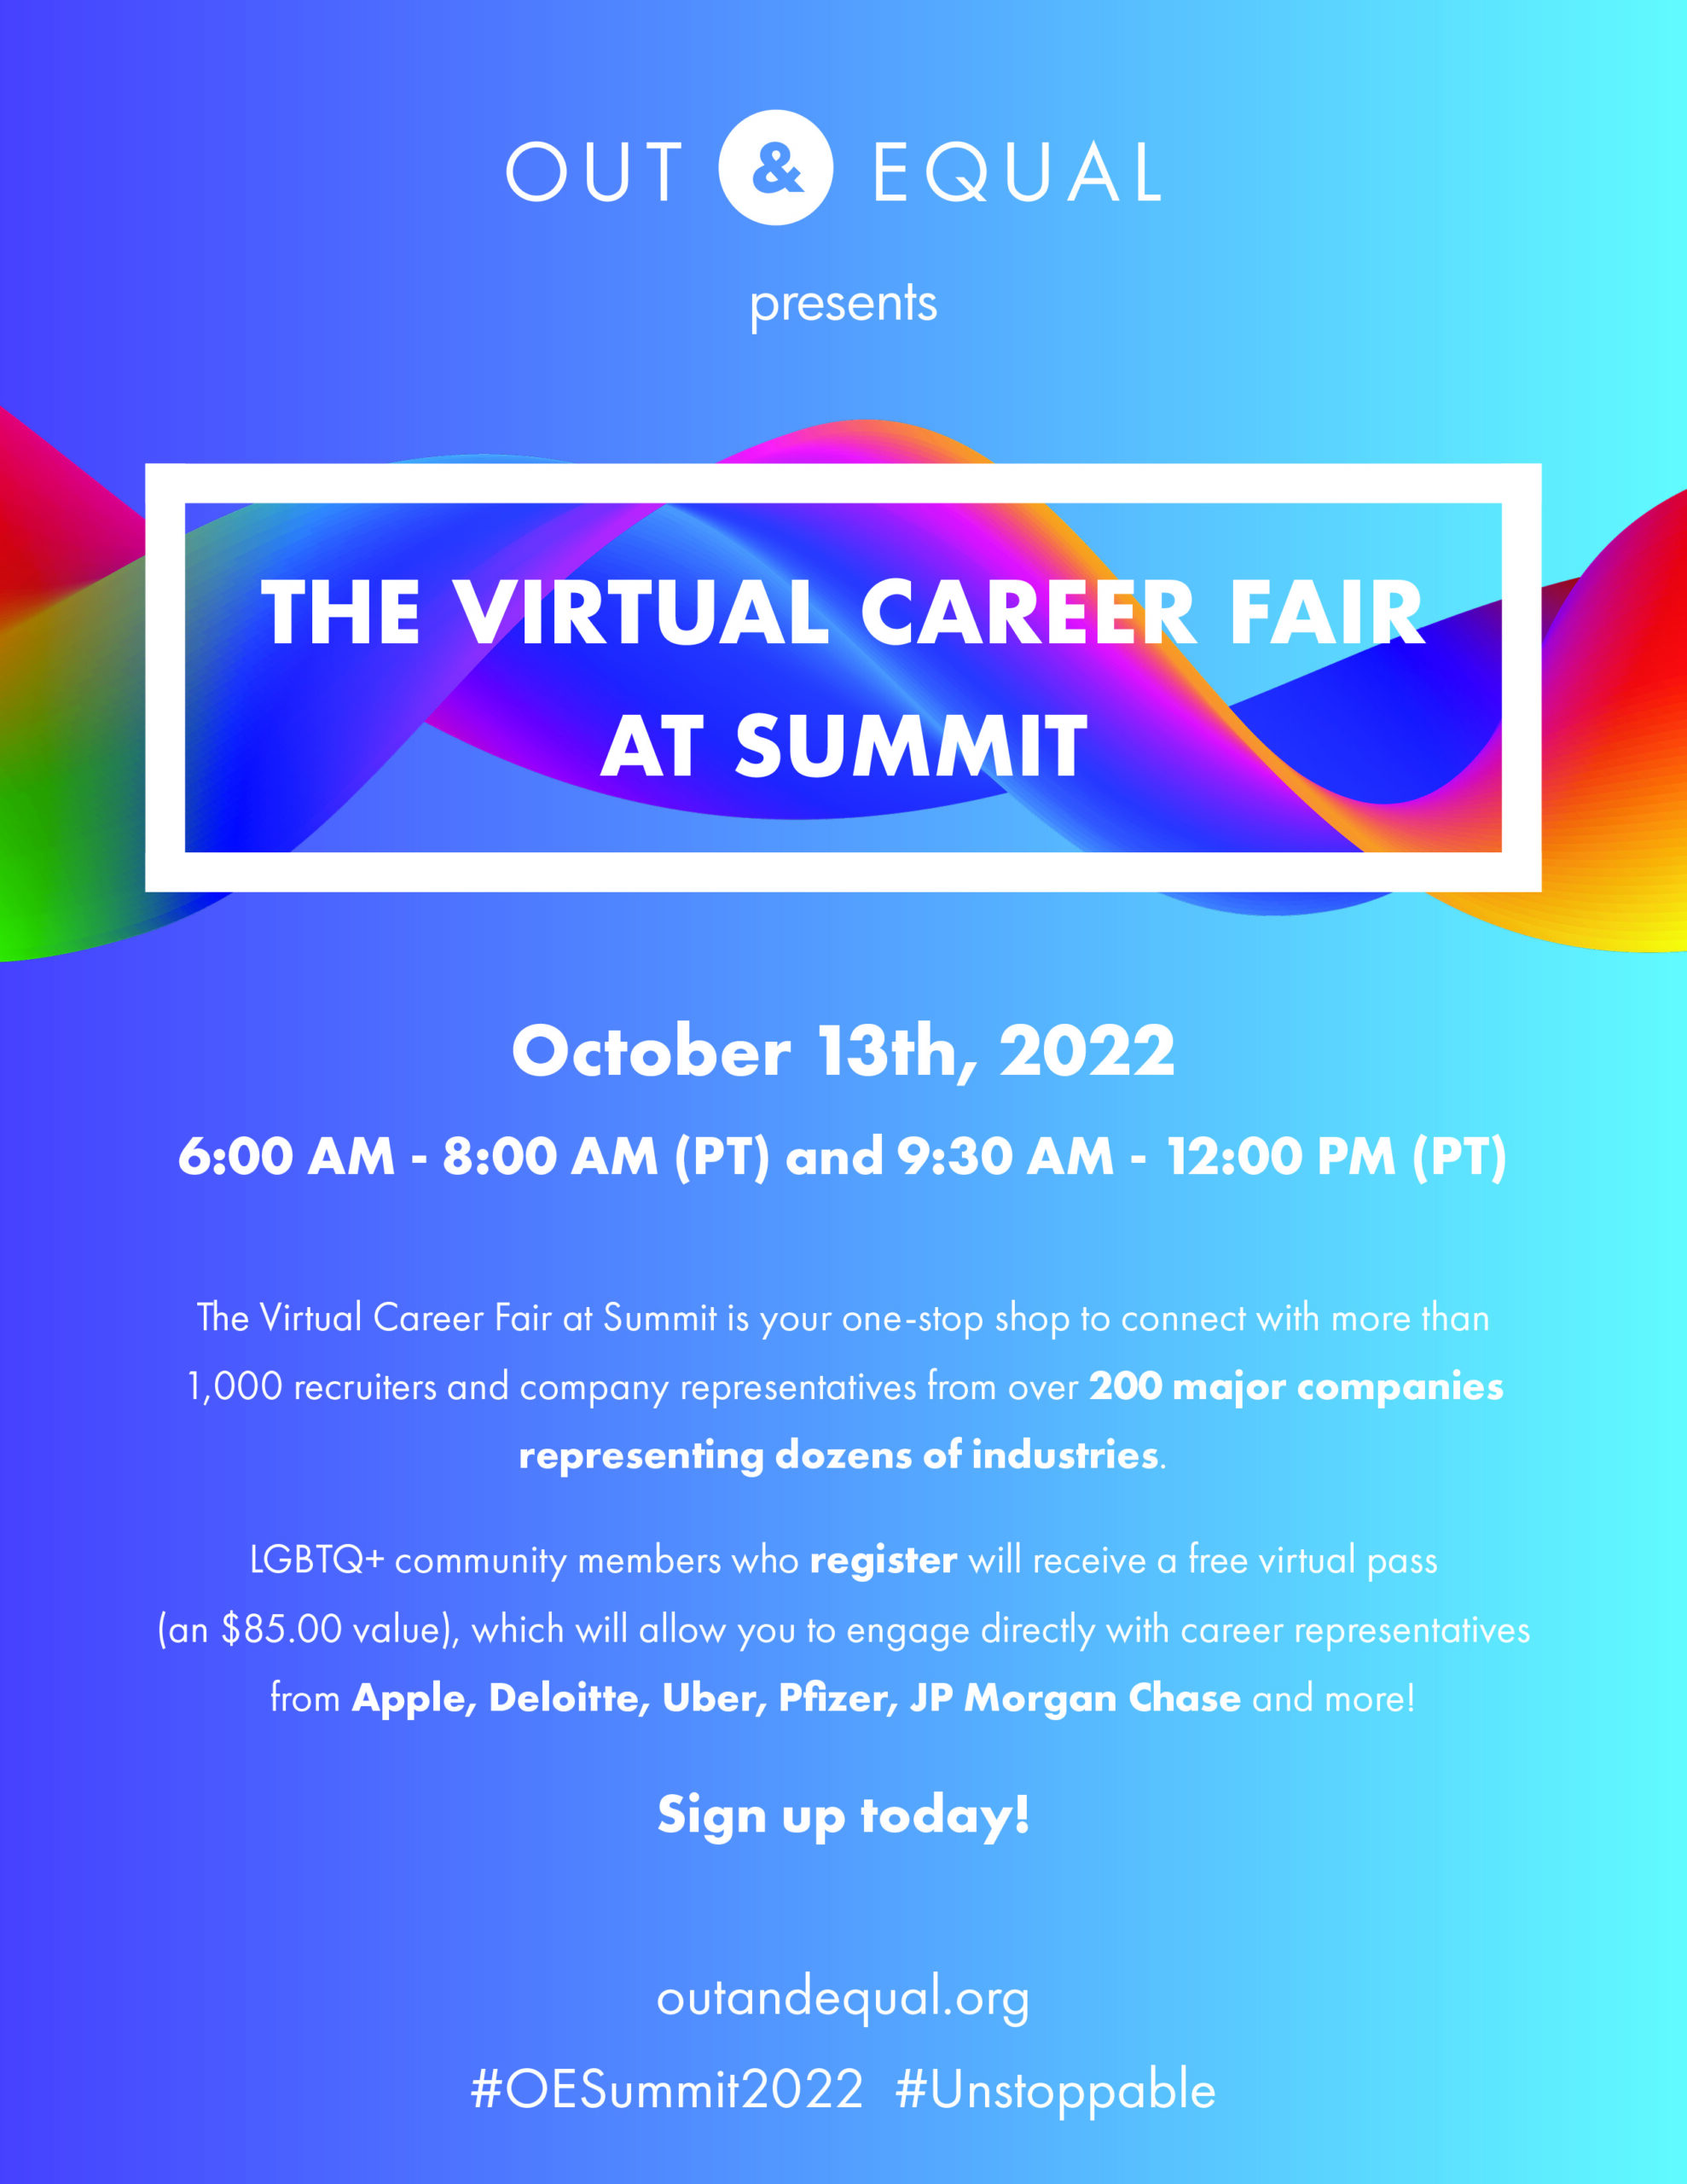 2022 Workplace Summit Virtual Career Fair Out & Equal